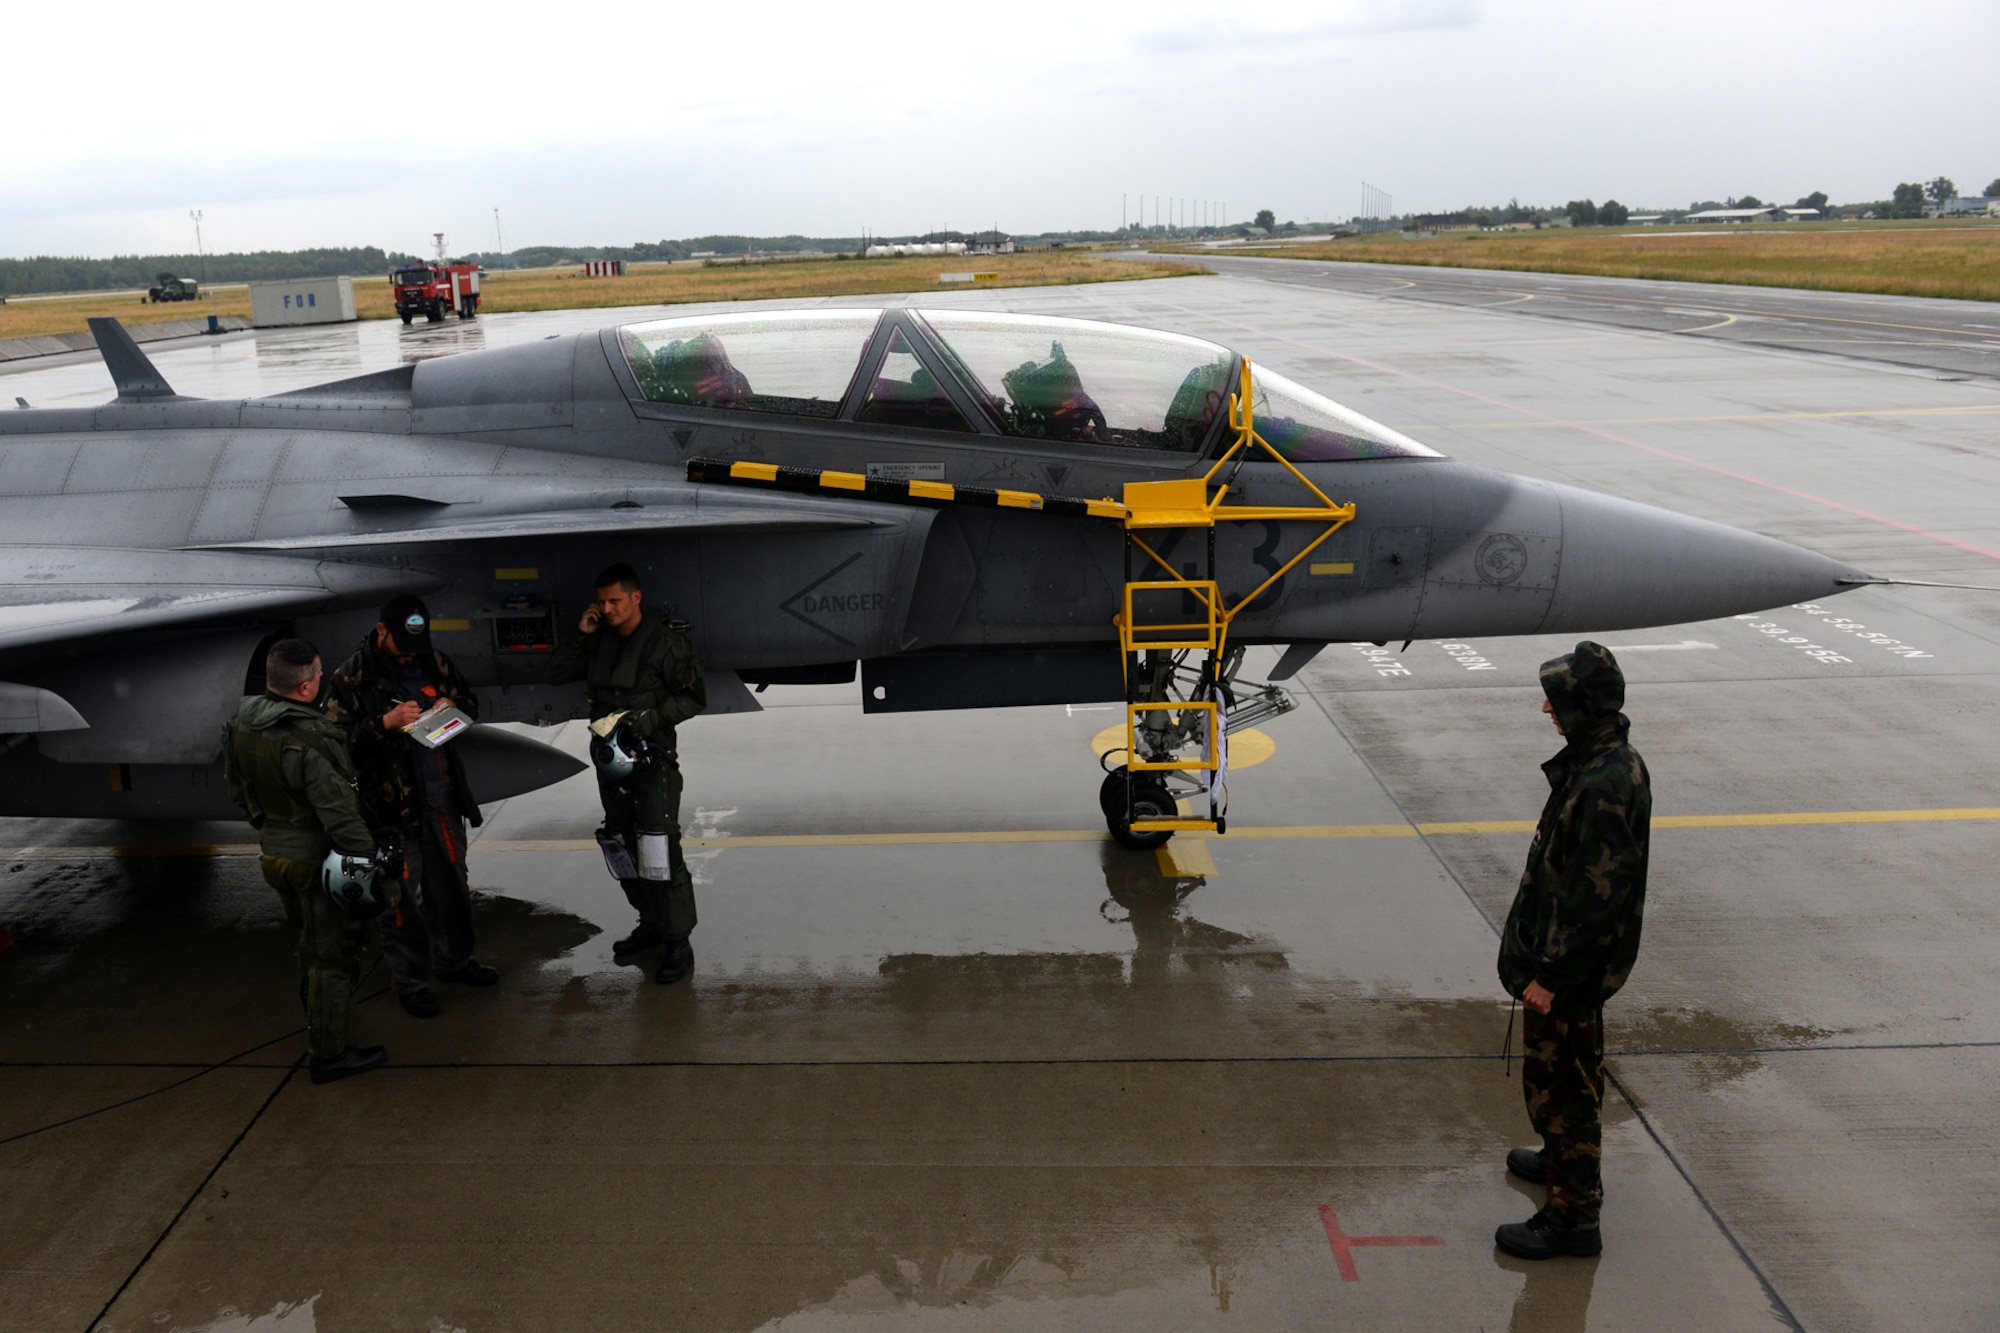 Hungarian and Swedish air force JAS-39 Gripen pilots and aircraft maintainers shield themselves from rain while performing a pre-flight inspection June 24, 2015, during air refueling familiarization training on Kecskemét air base, Hungary. Hungarian, U.S. and Swedish air force personnel met for a two-week familiarization period enabling the Hungarian JAS-39 Gripen pilots to successfully perform air refueling for the first time. (U.S. Air Force photo by Senior Airman Kate Thornton/Released)